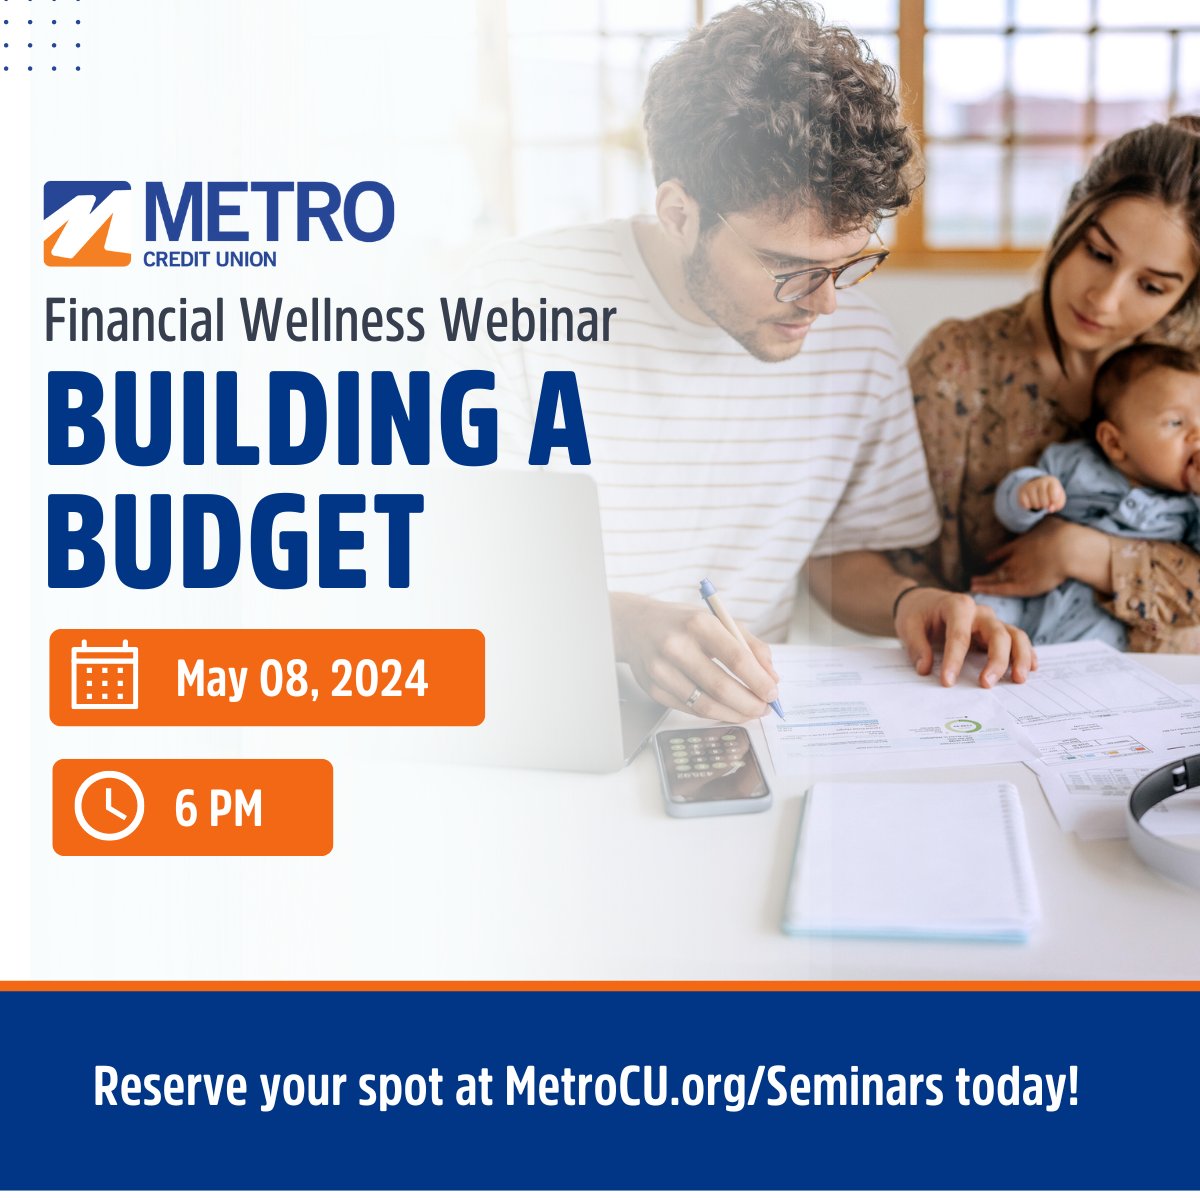 Building a #budget that works for you is easier than you might think! Join us for a free webinar to cover all the basics & a five-step #spendingplan to help you reach your #financialgoals. Don’t miss out! ow.ly/iQH450RsJCj